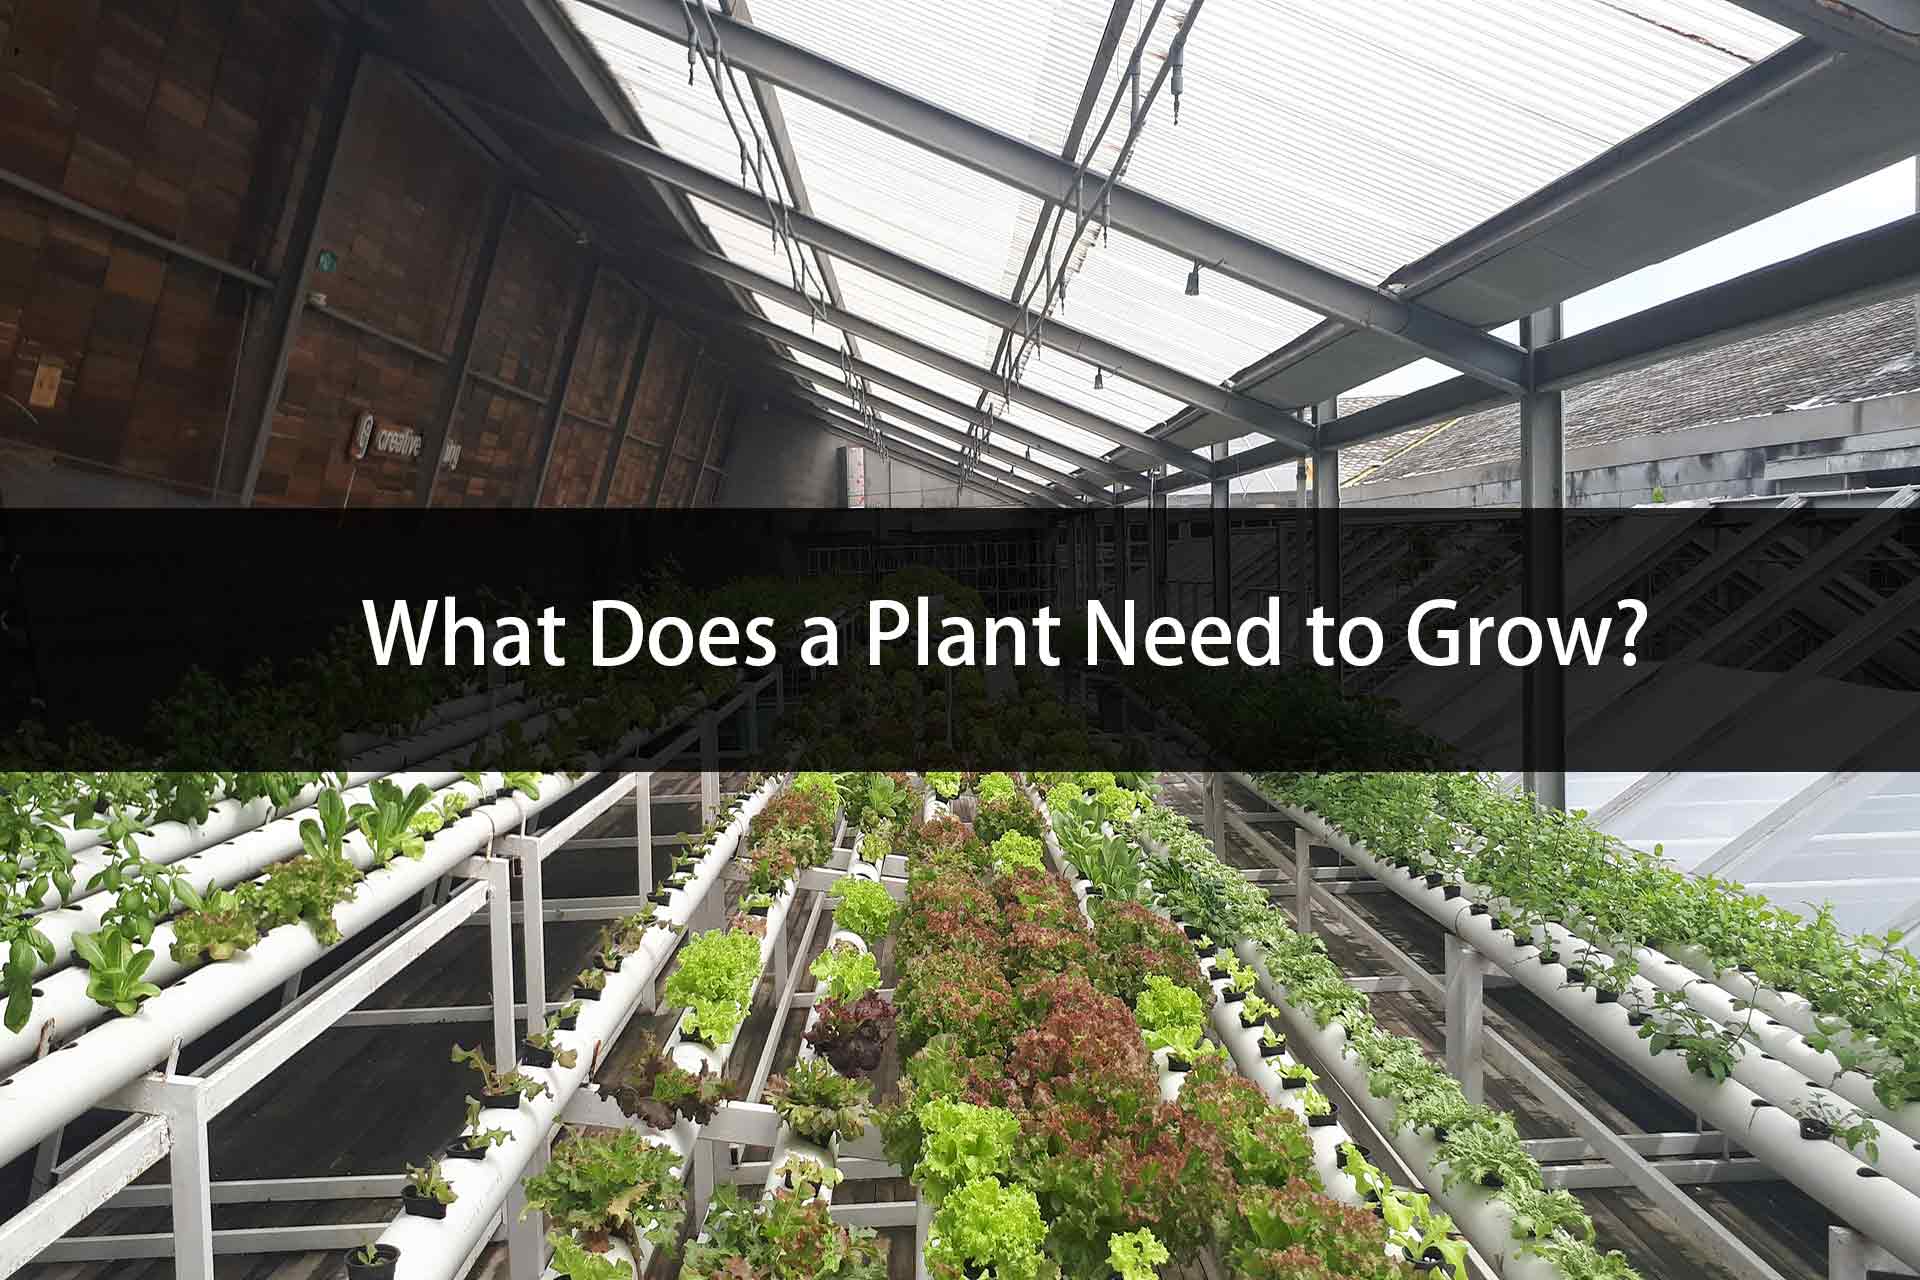 What Does a Plant Need to Grow?